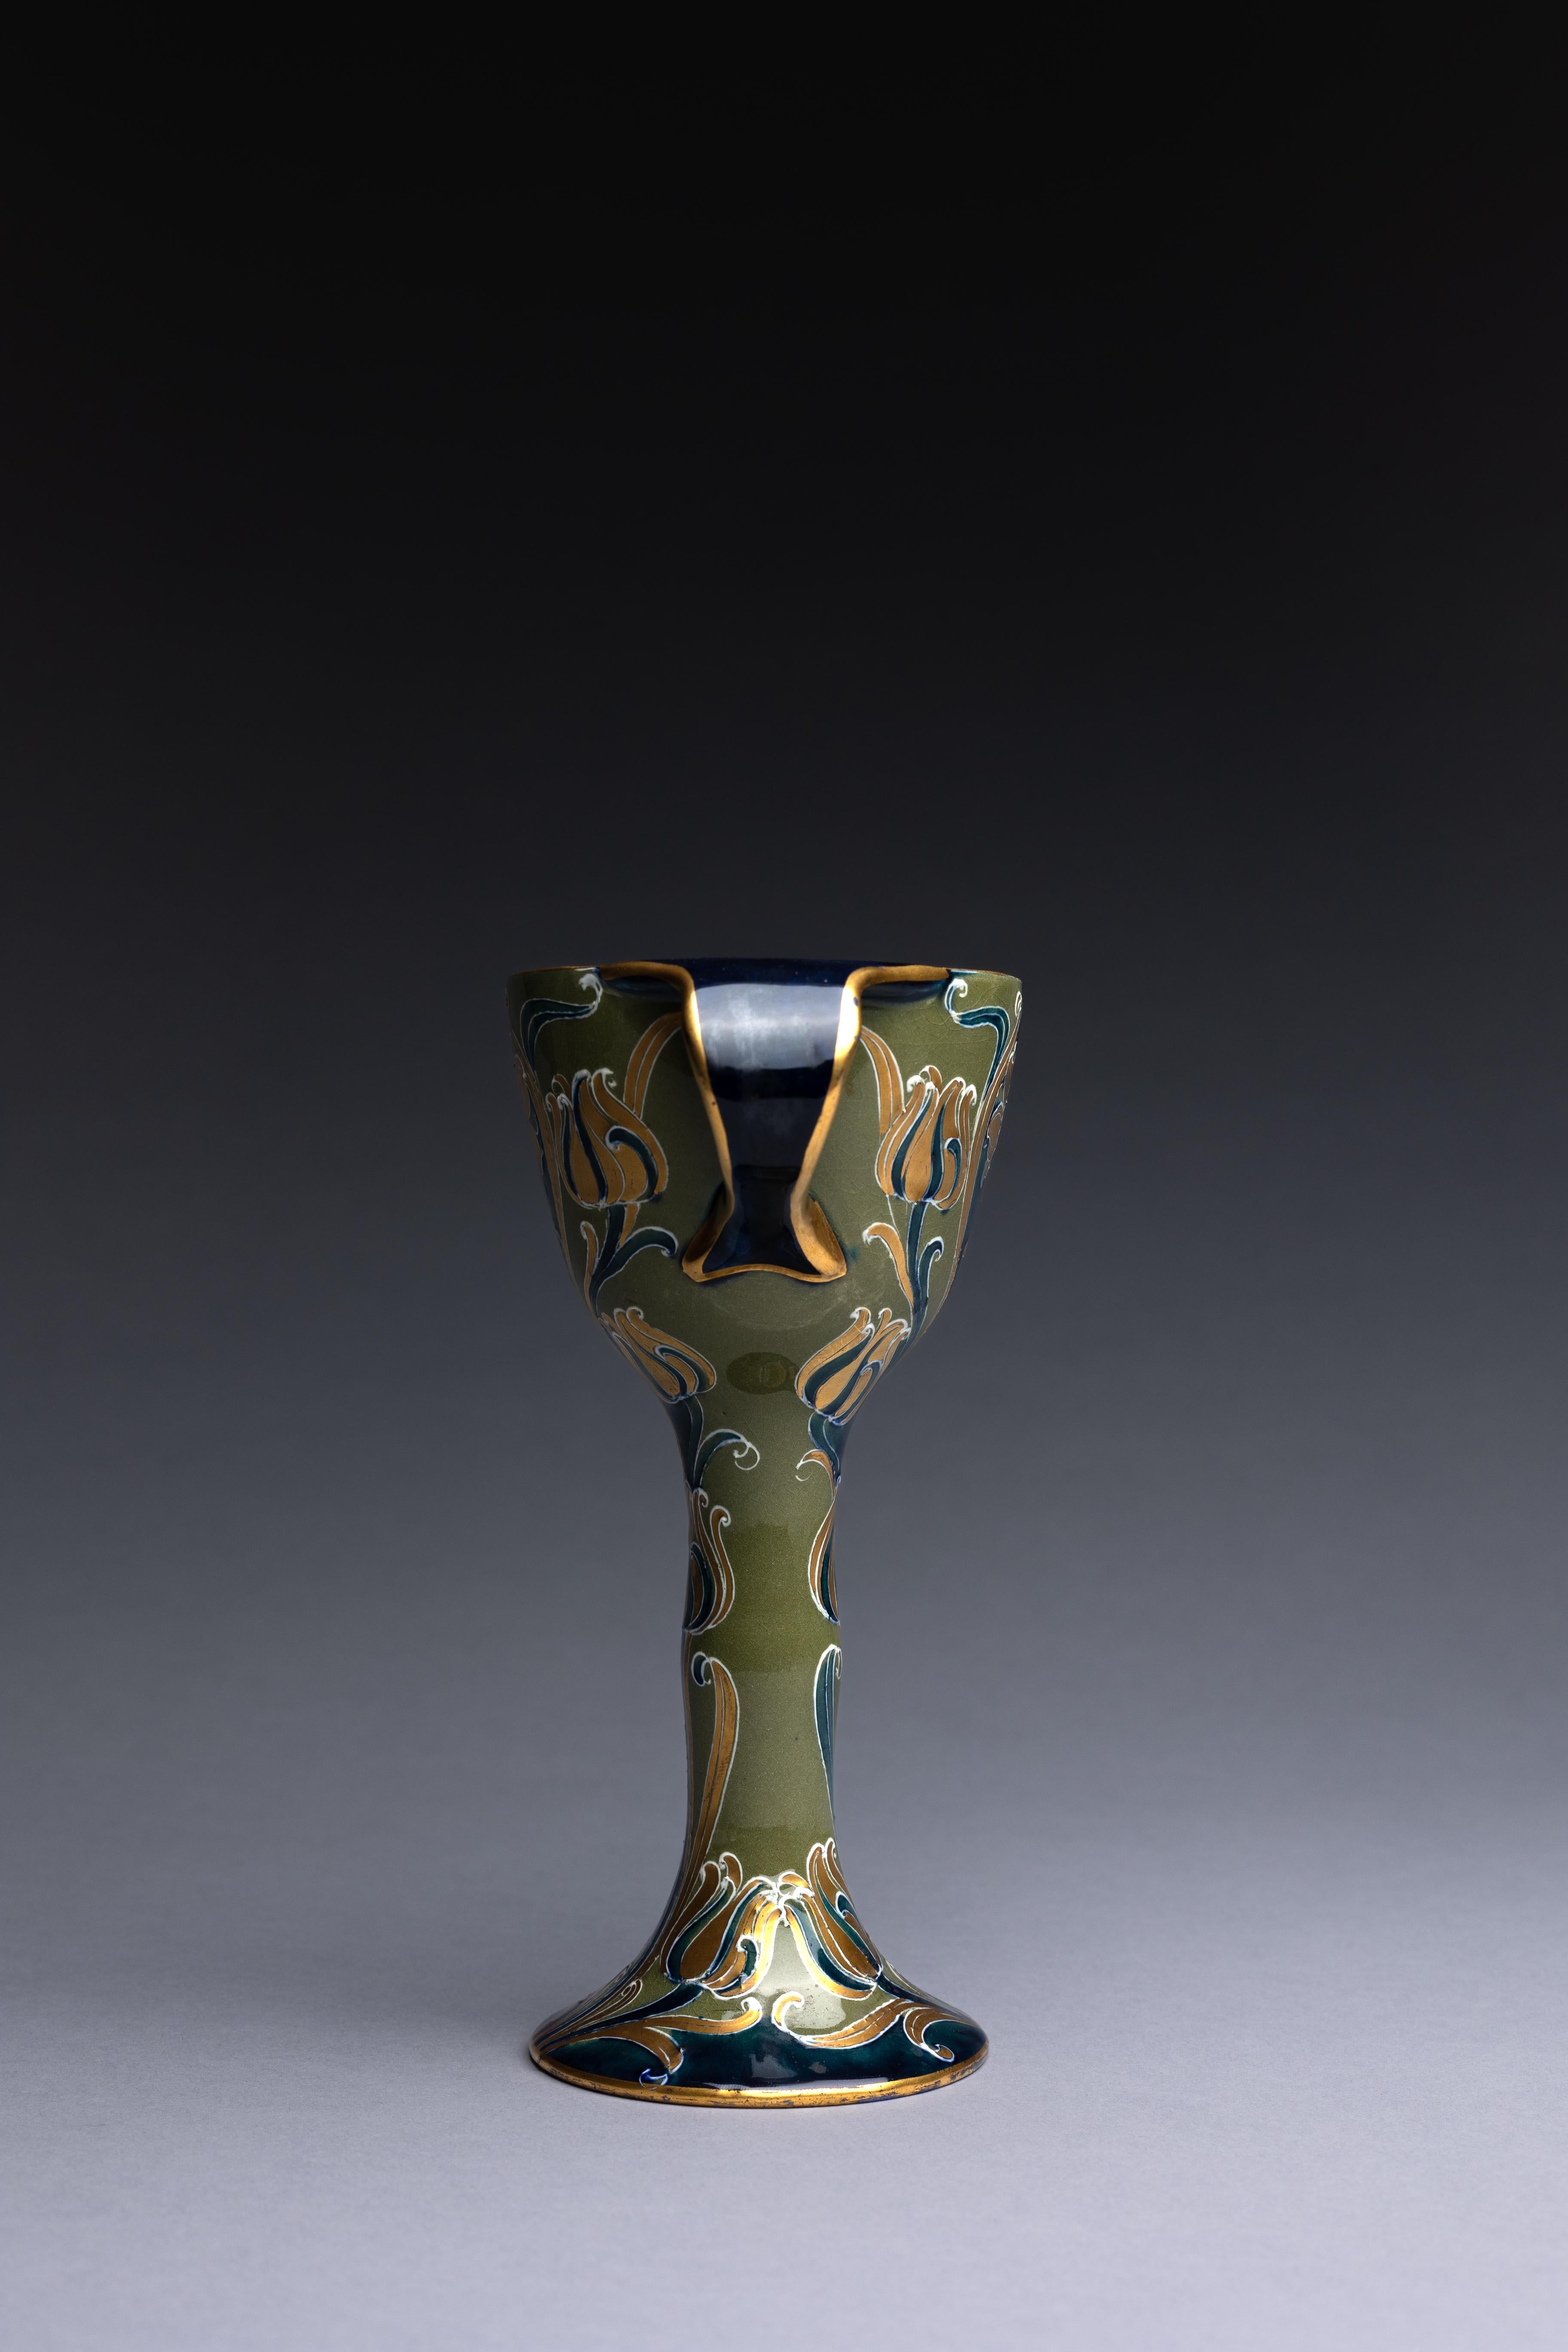 A decorative pottery goblet created by William Moorcroft for James MacIntyre & Co. in 1903.

This goblet is part of William Moorcroft's Green and Gold Florian line. In producing these wares, Moorcroft utilized a medieval ceramic technique of